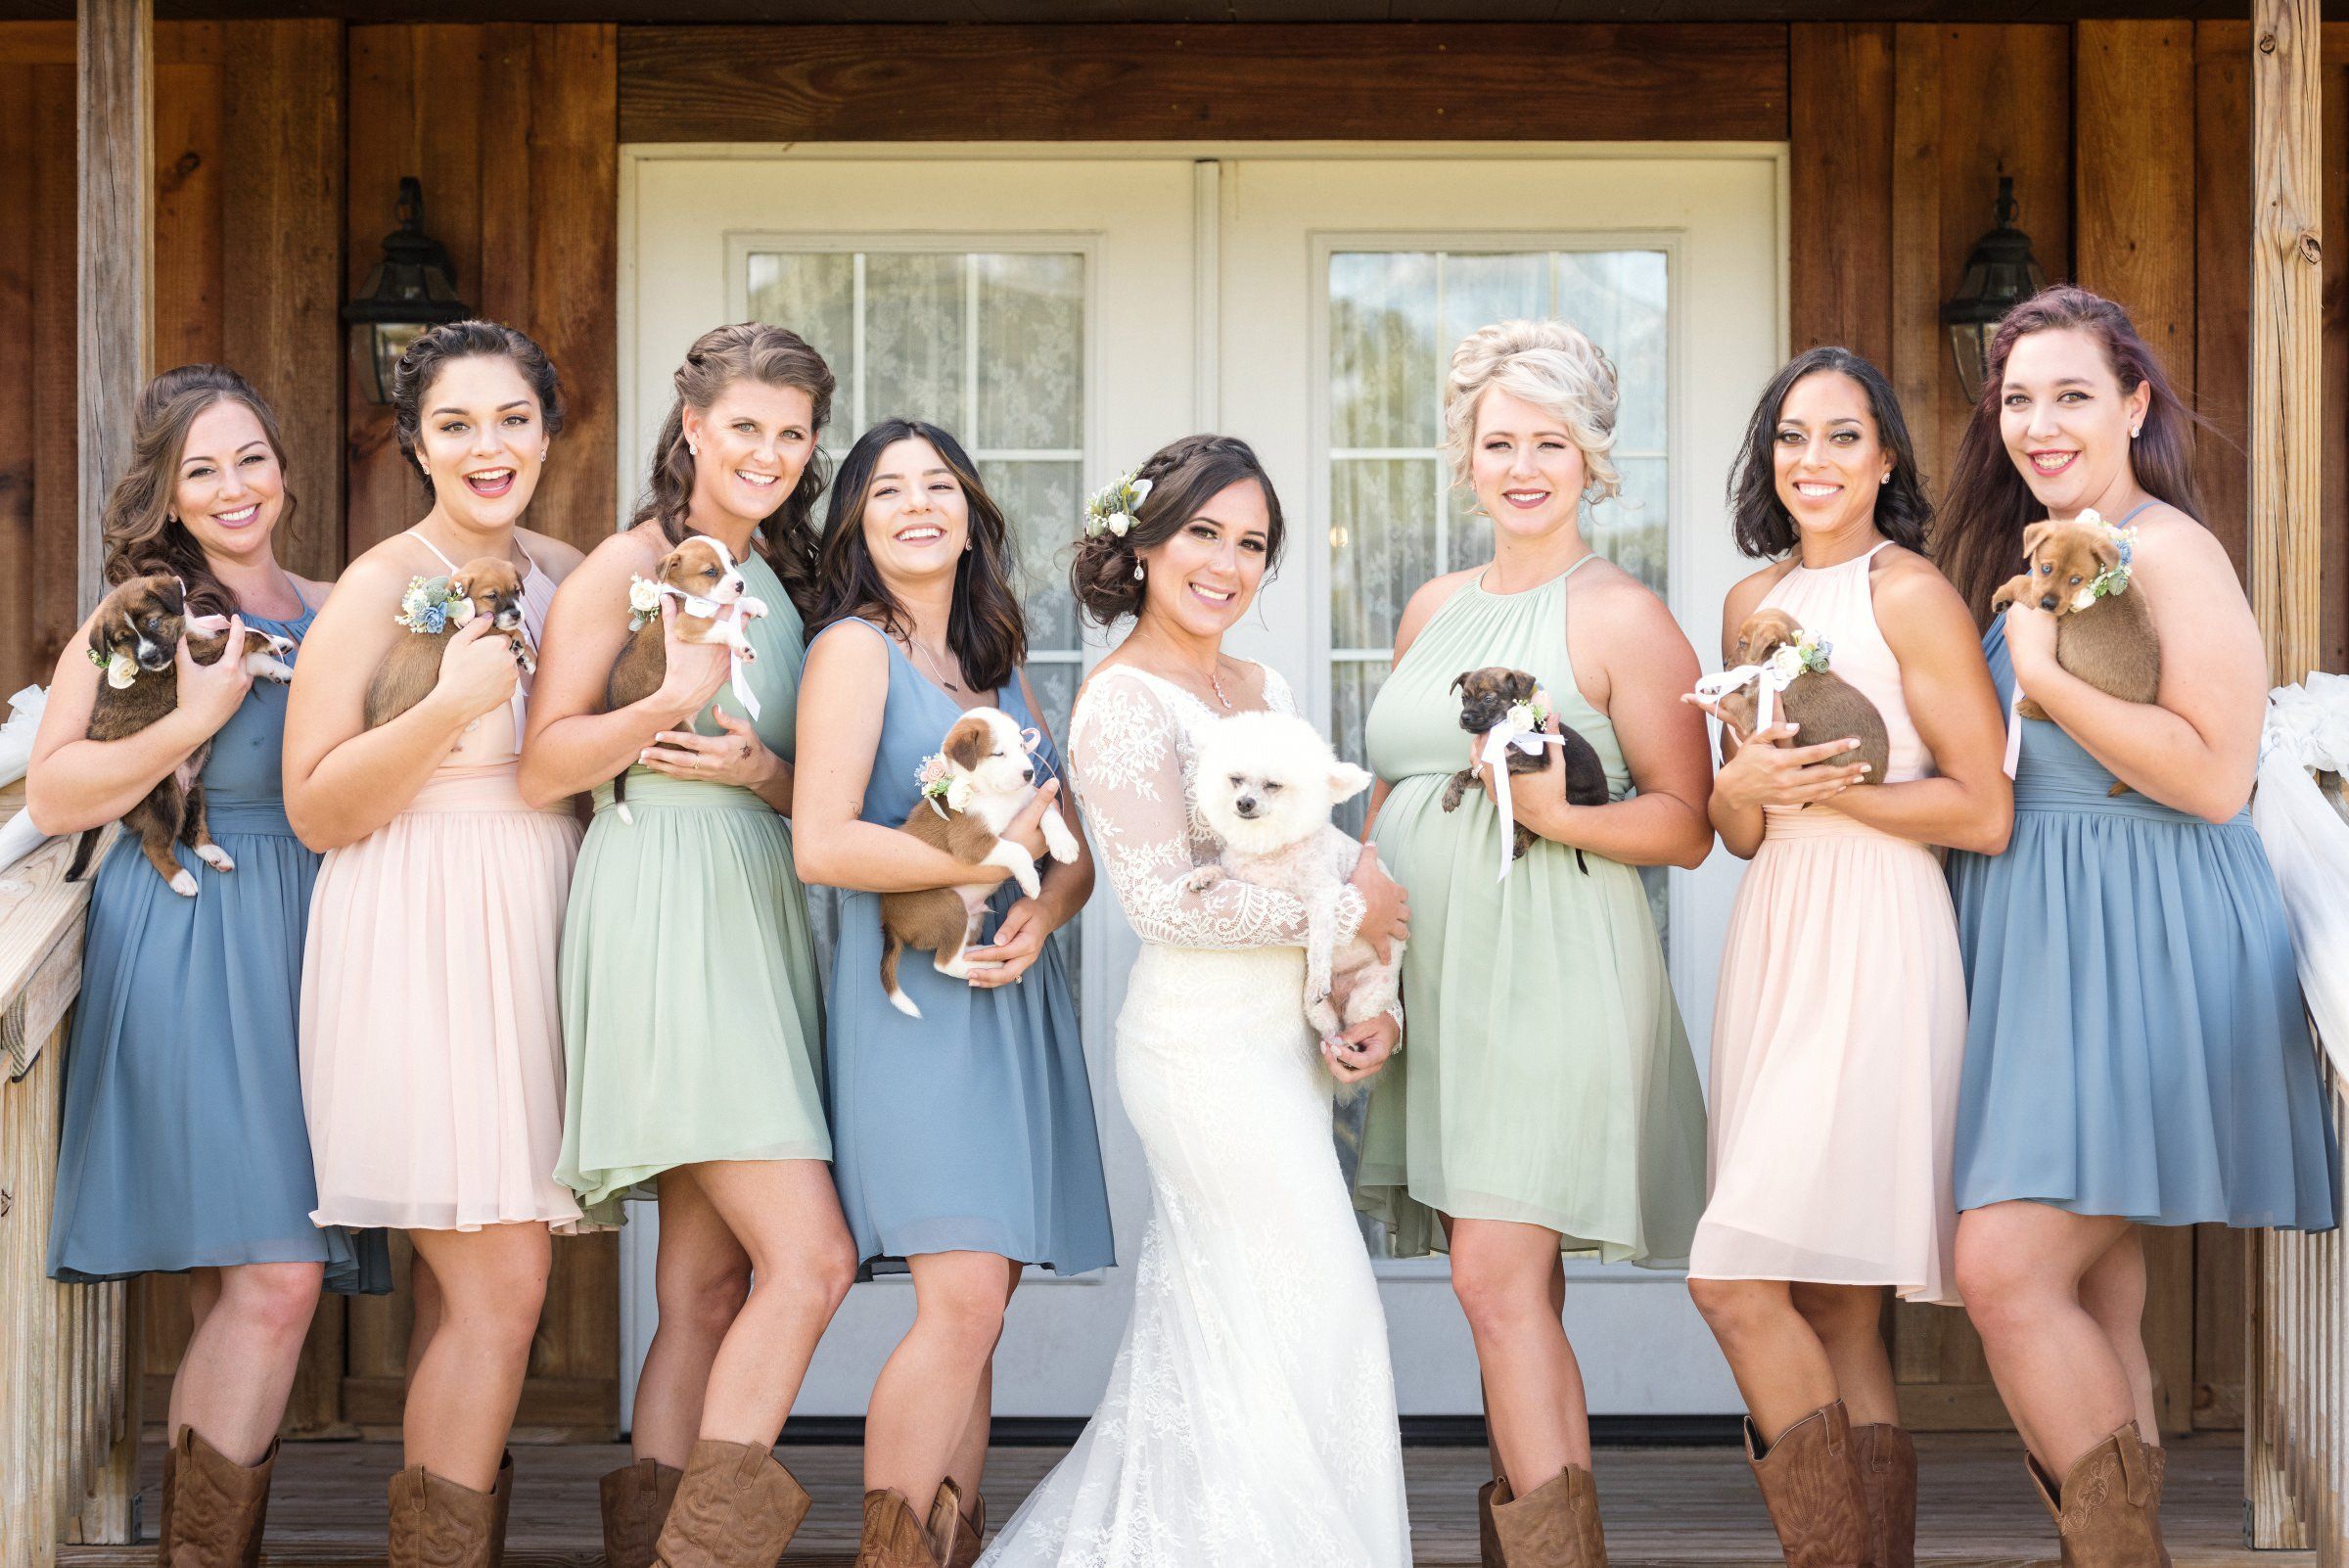 bridal_party_advocates_shelter_animal_adoption_by_exchanging_bouquets_for_sweet_puppies